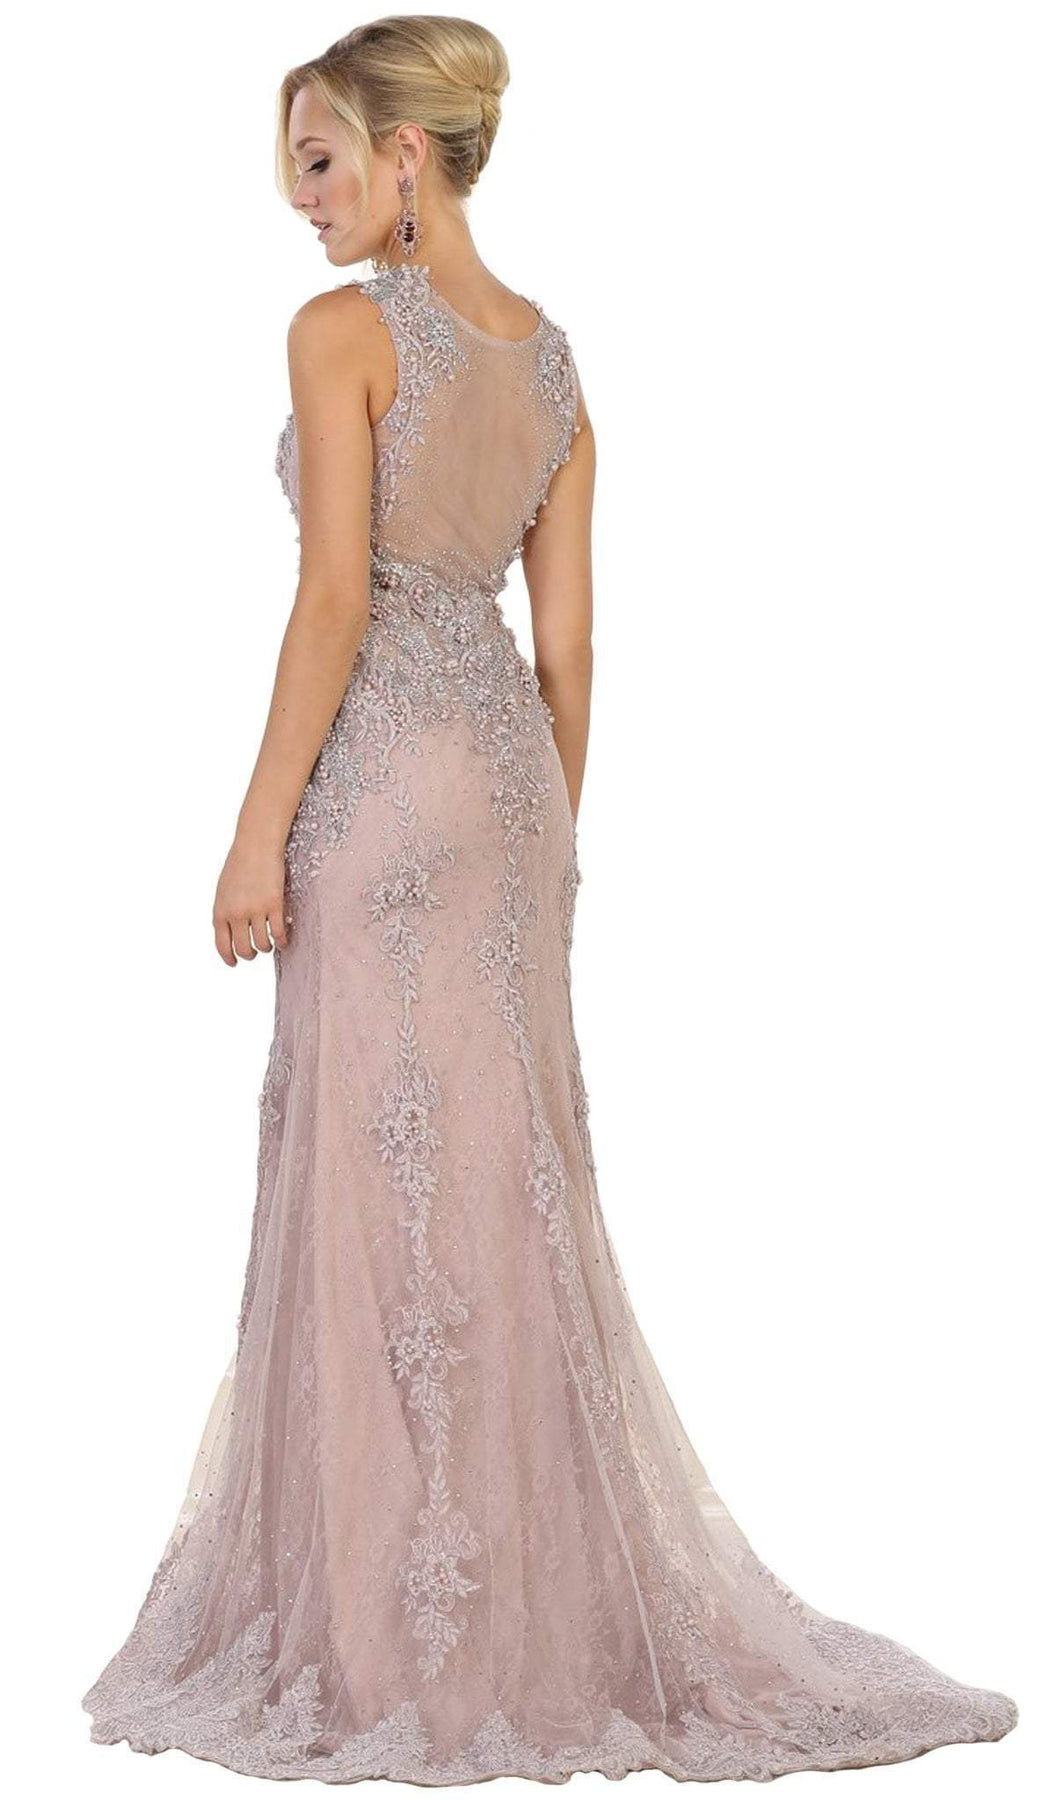 May Queen - RQ7551 Embellished Illusion Jewel Sheath Prom Gown Special Occasion Dress